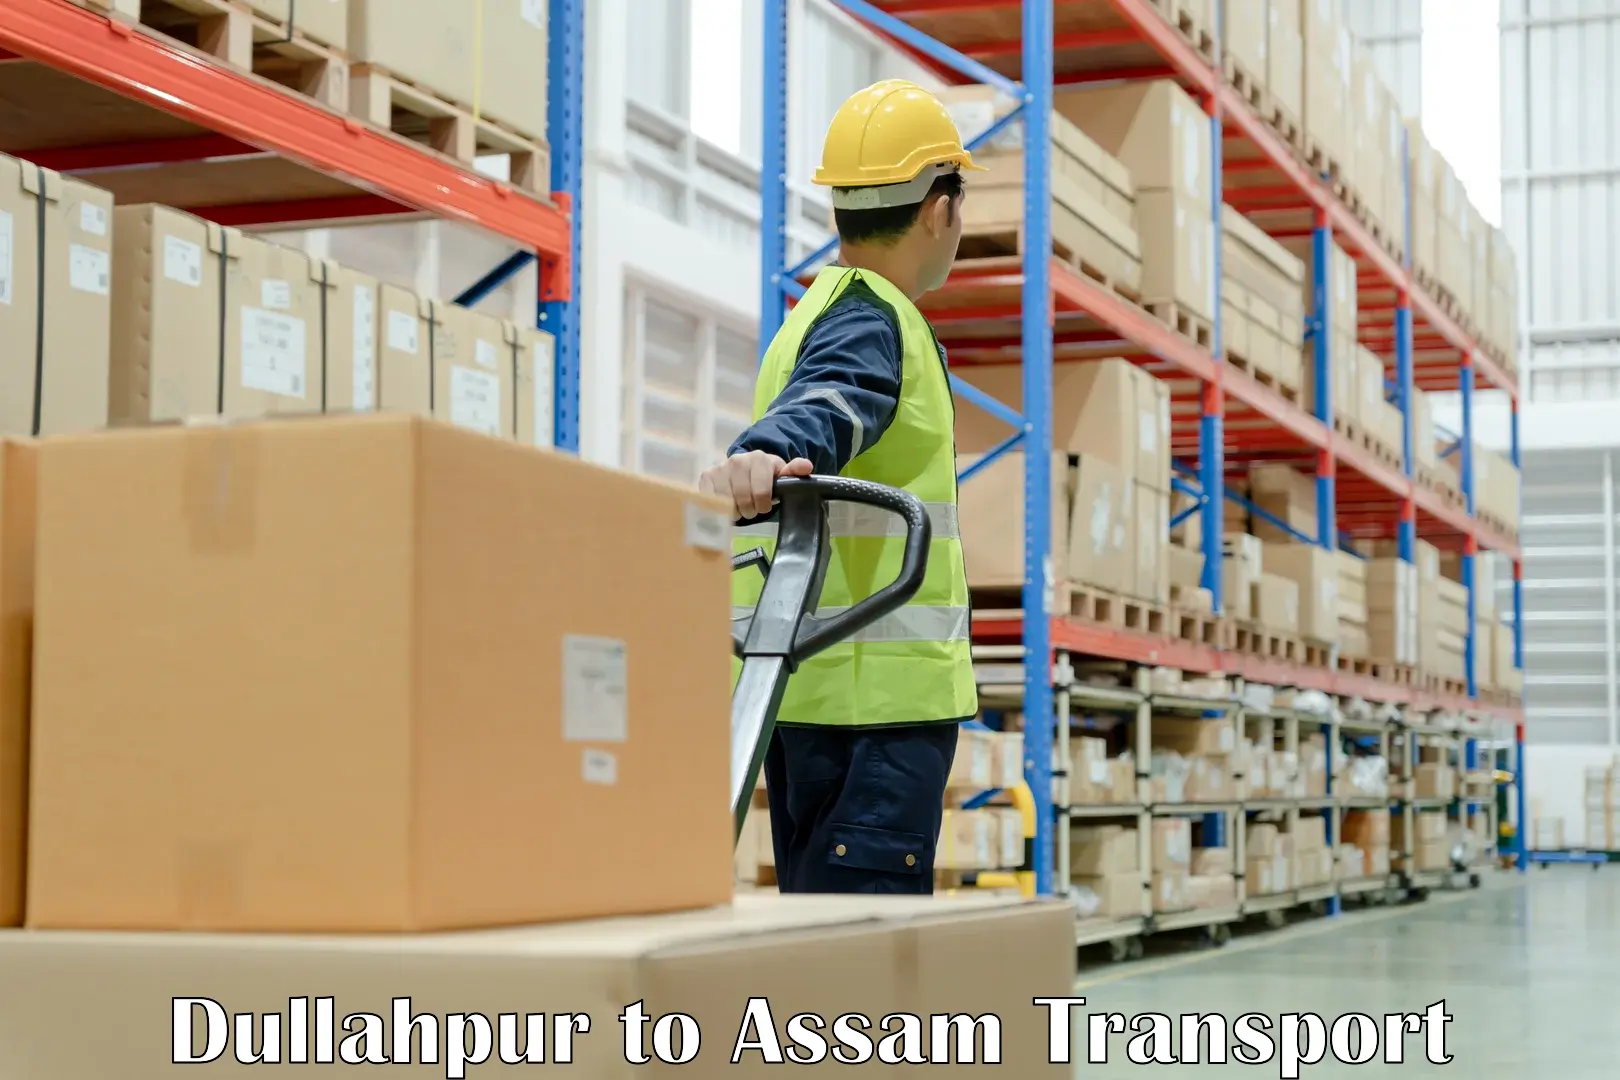 Container transport service in Dullahpur to Lala Assam